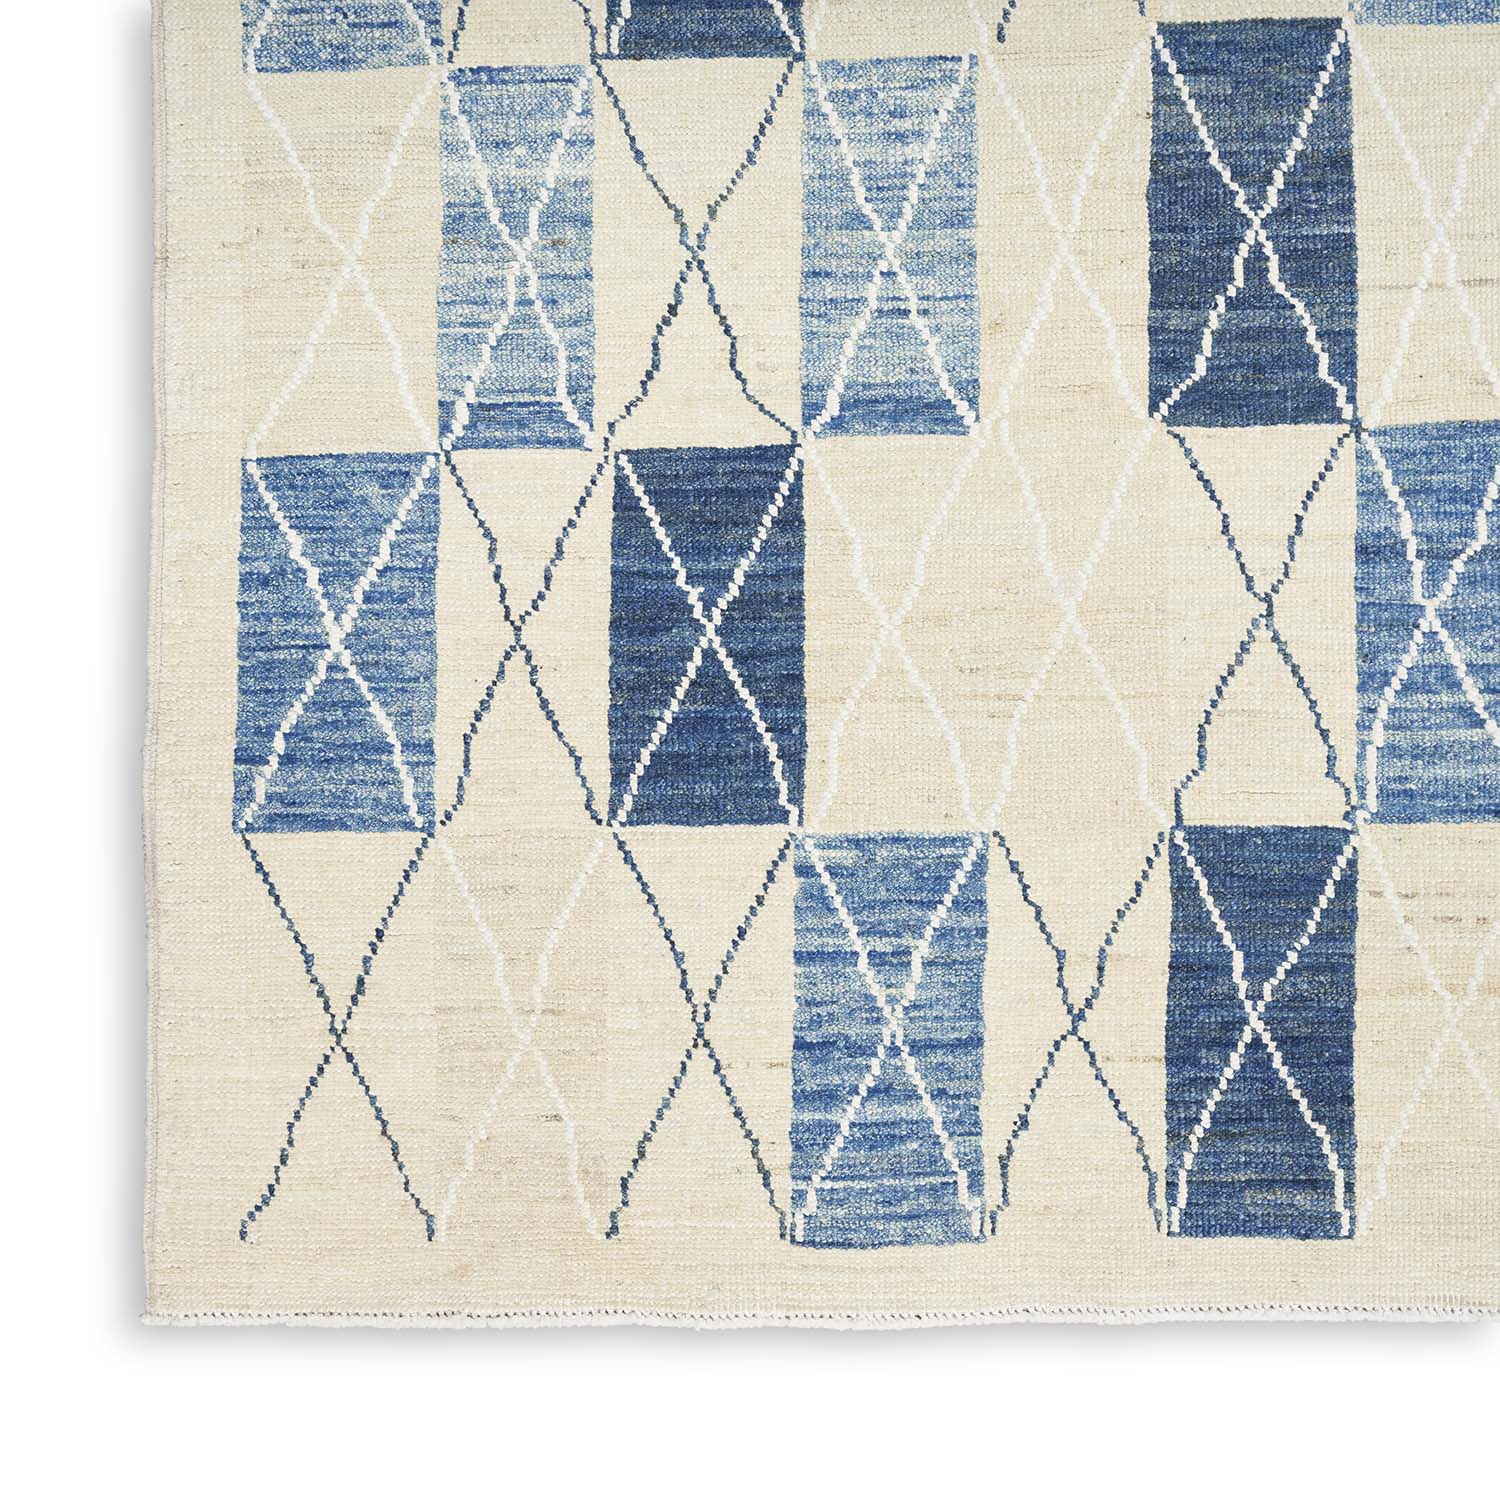 Contemporary rug with blue and white diamond pattern displays artisanal charm.